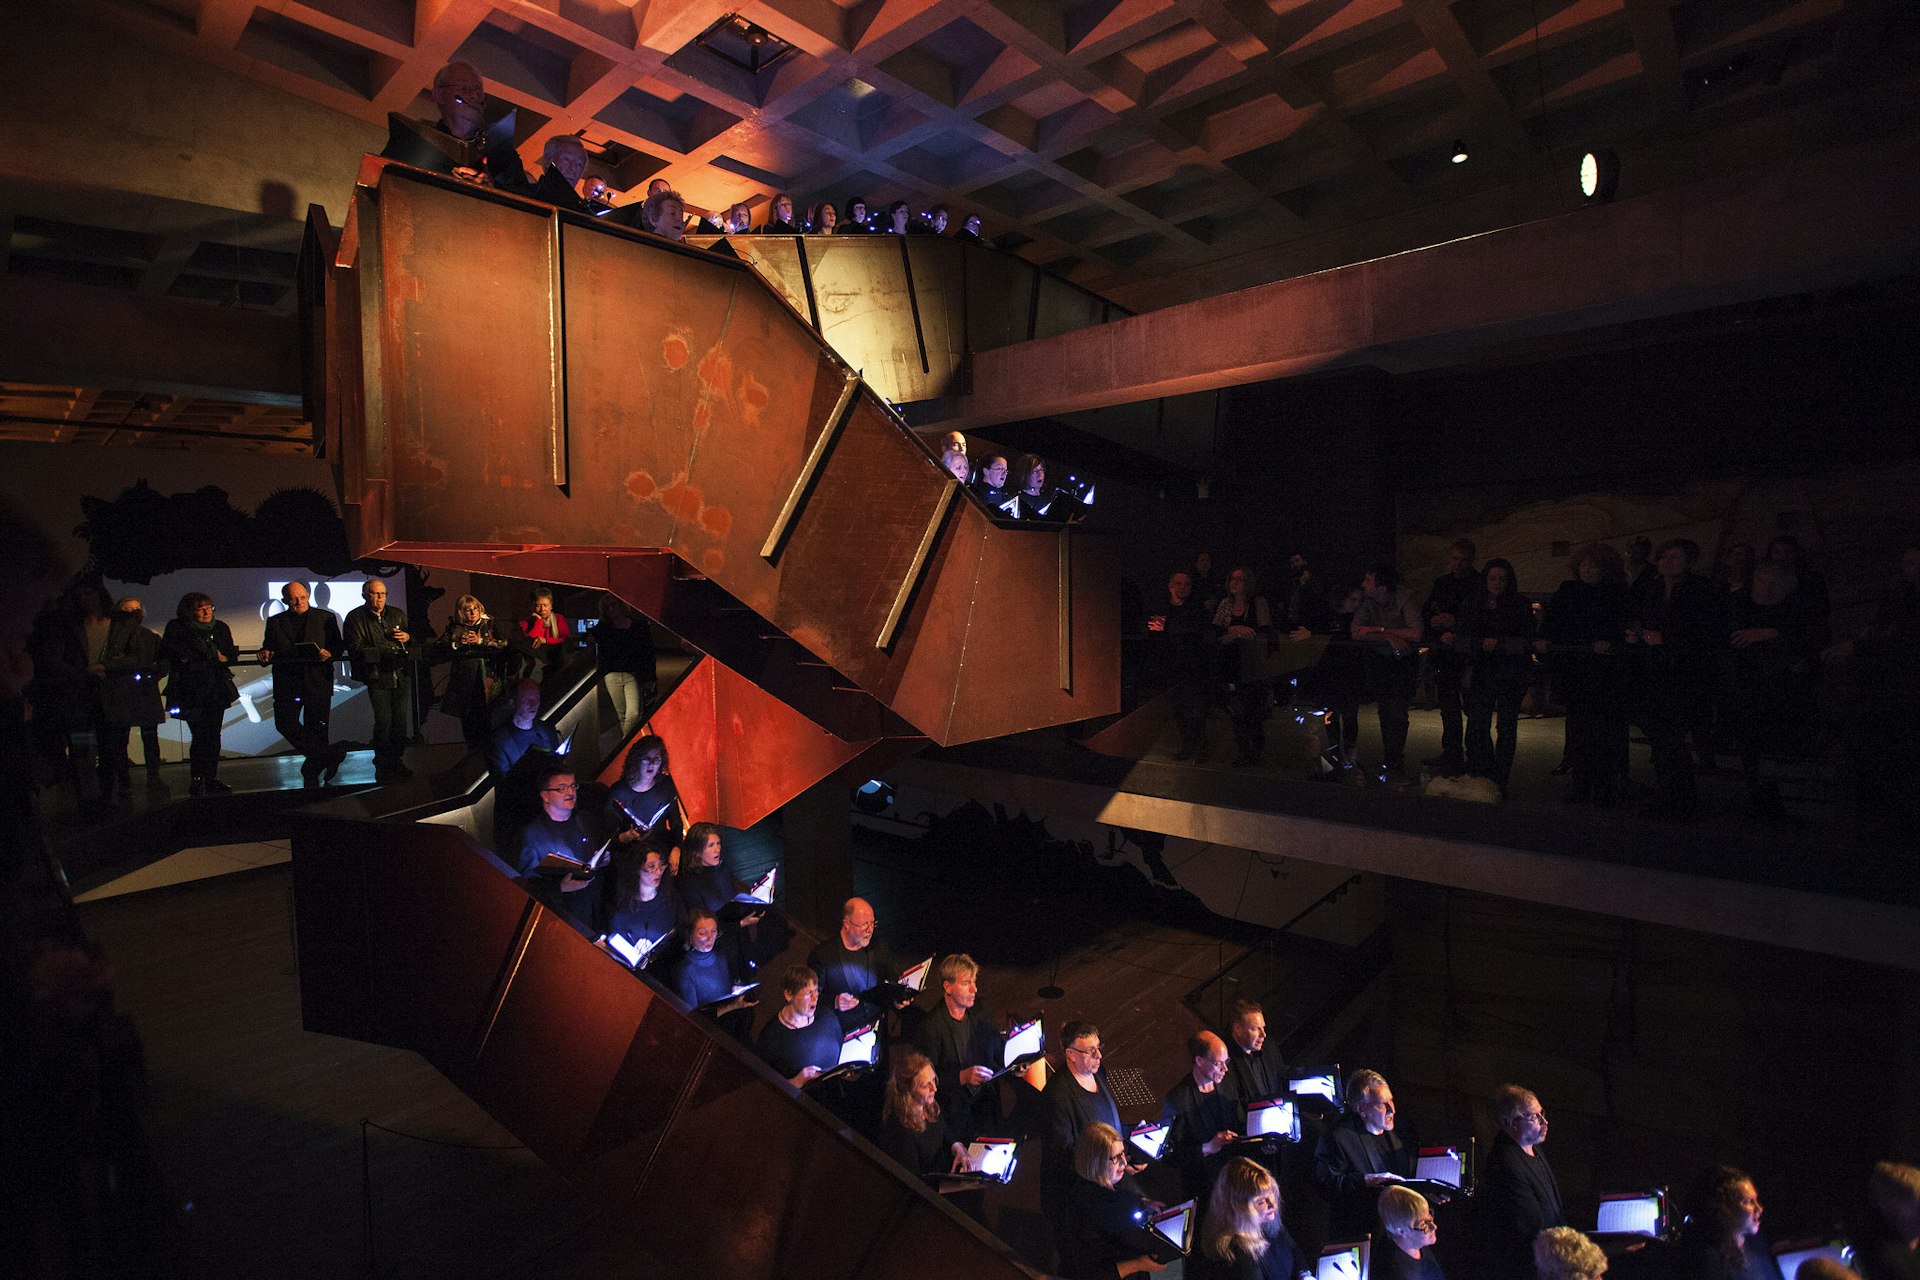 TSO performing inside the Museum of Old and New Art, Hobart, Tasmania for MONA MOFO. Image by Rémi Chauvin / MONA